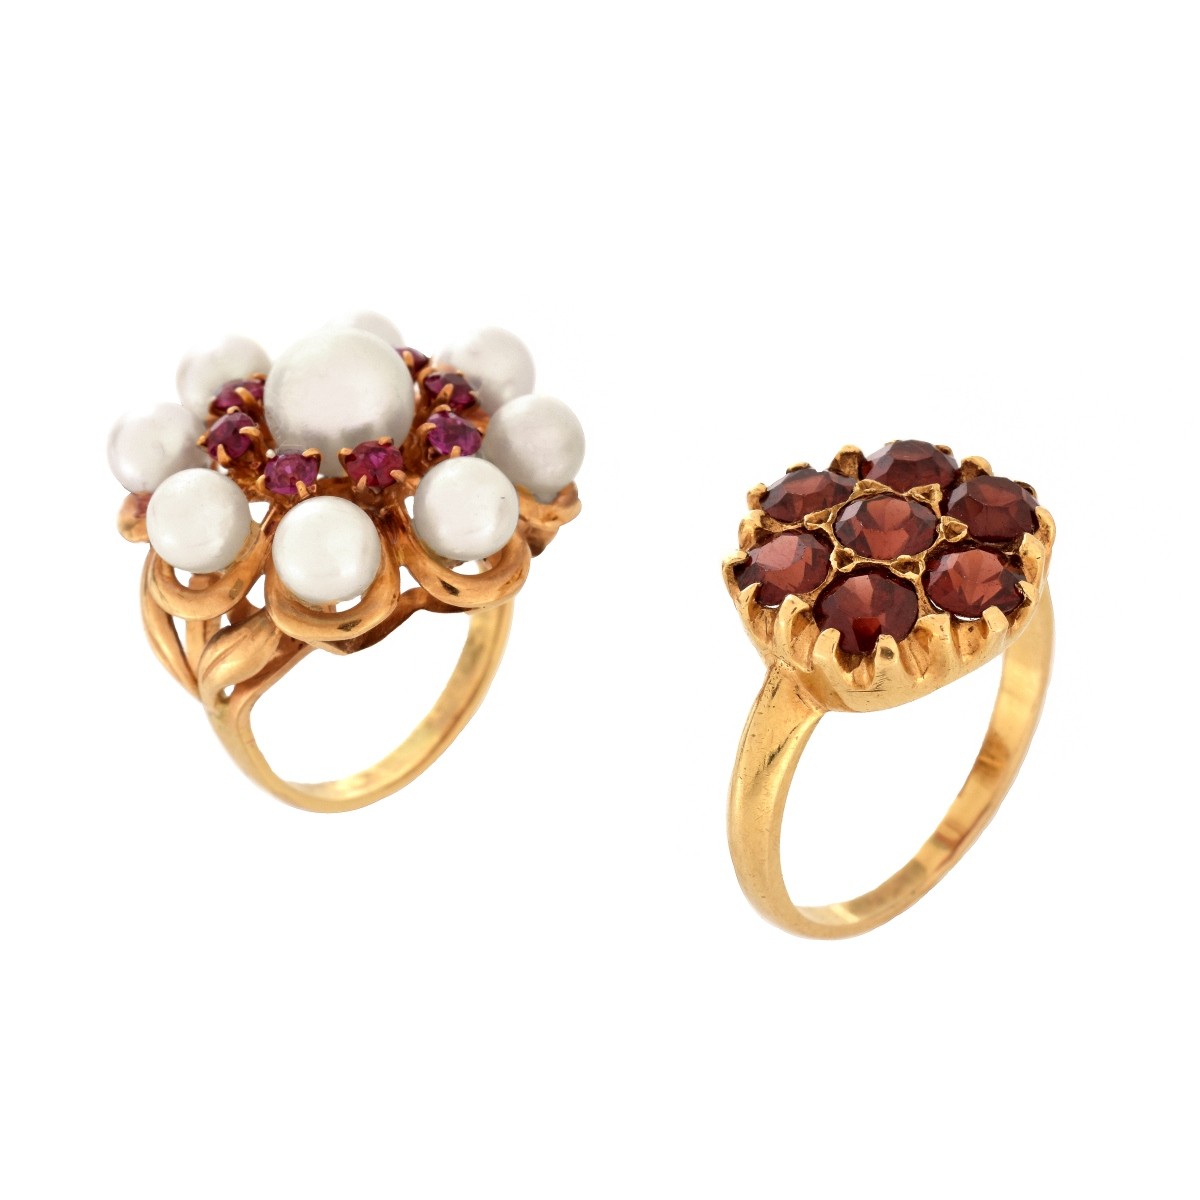 Two Gemstone and 14K Rings